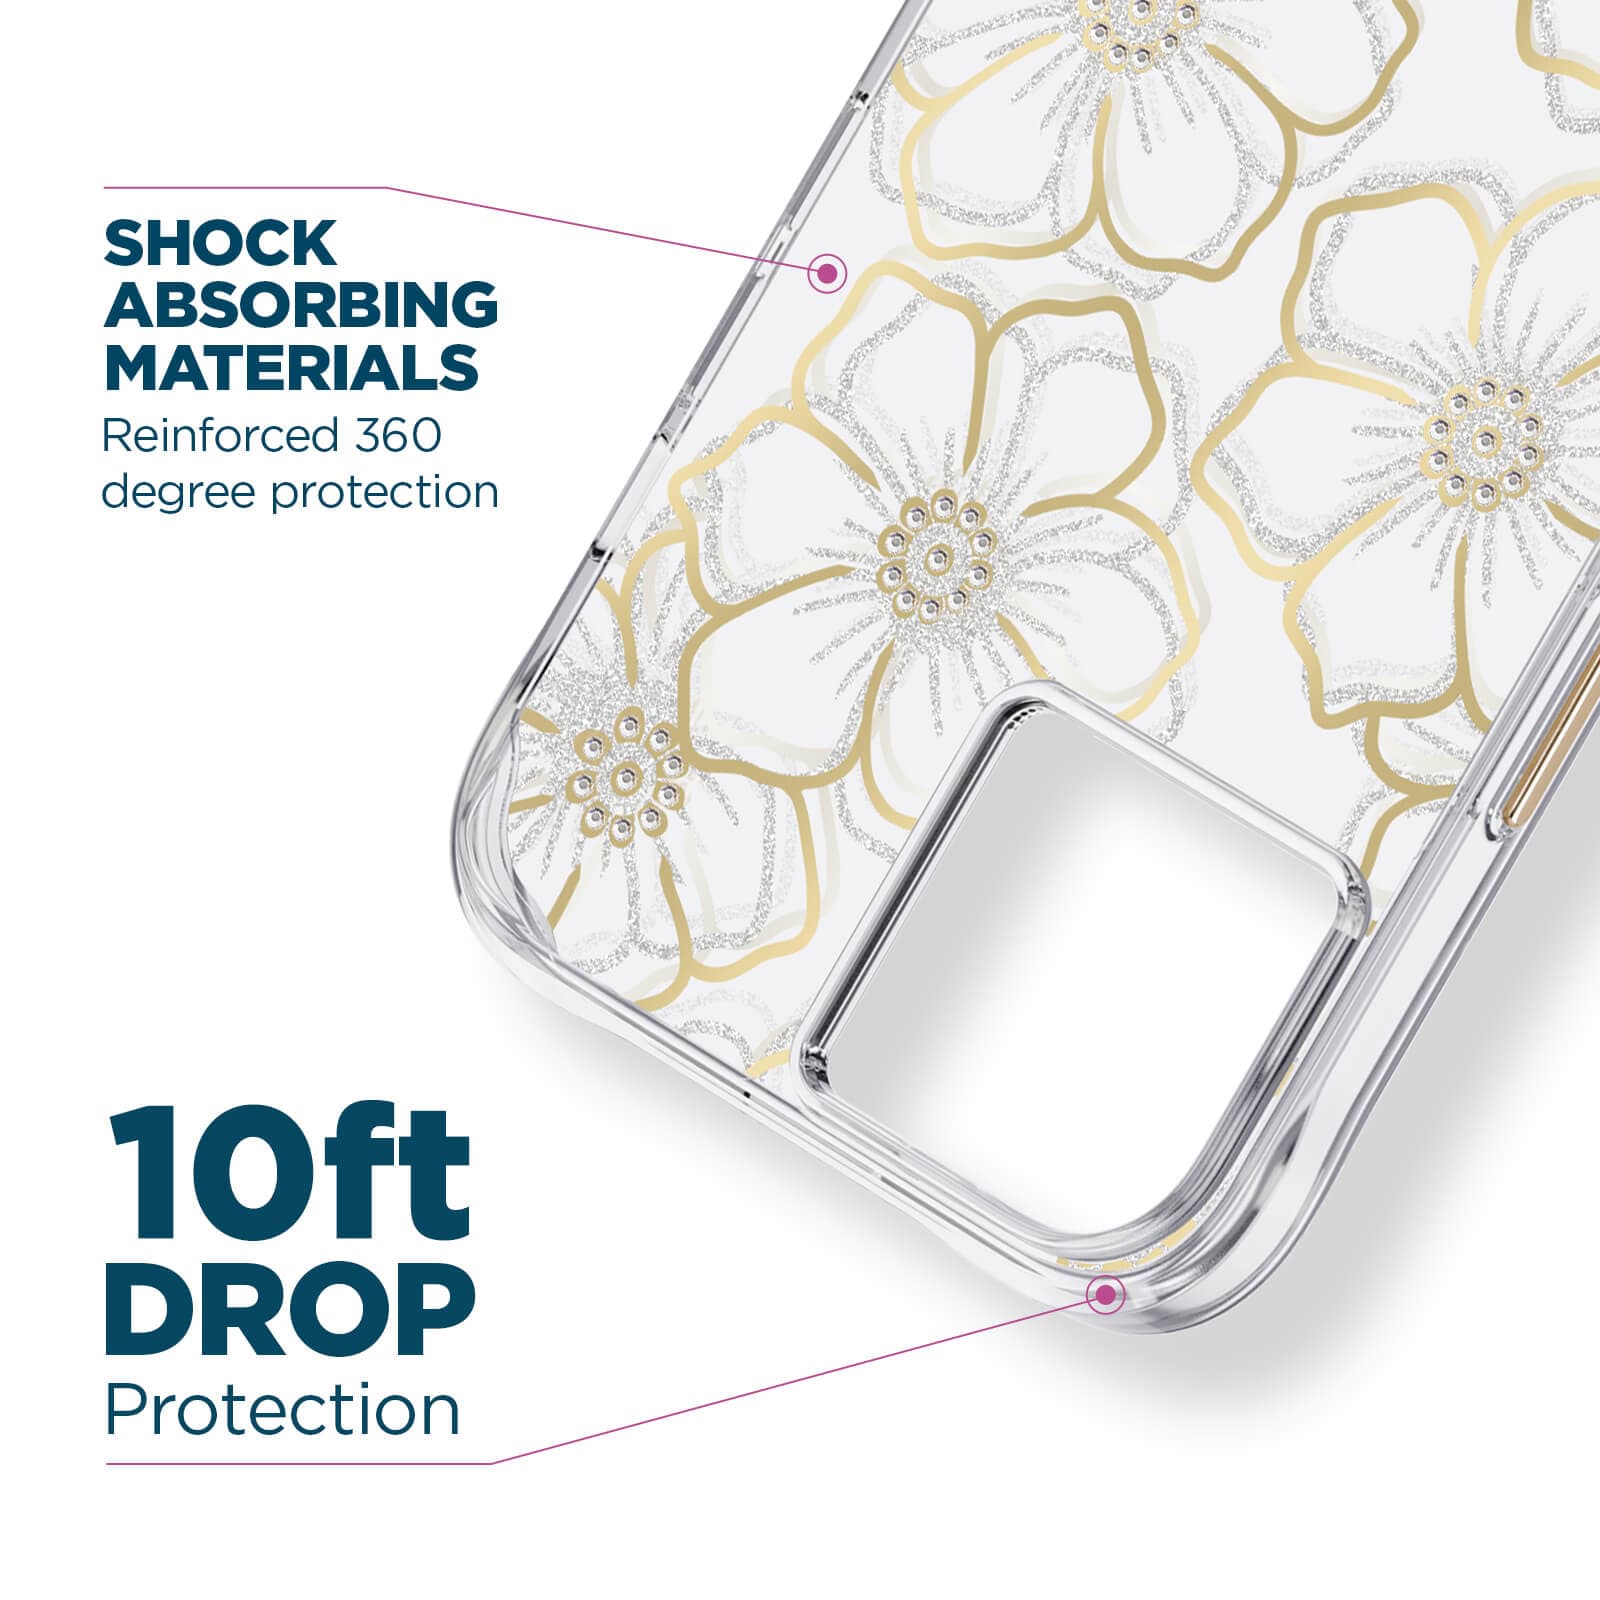 Shock absorbing materials reinforced 360 degree protection. 10ft drop protection. color::Floral Gems